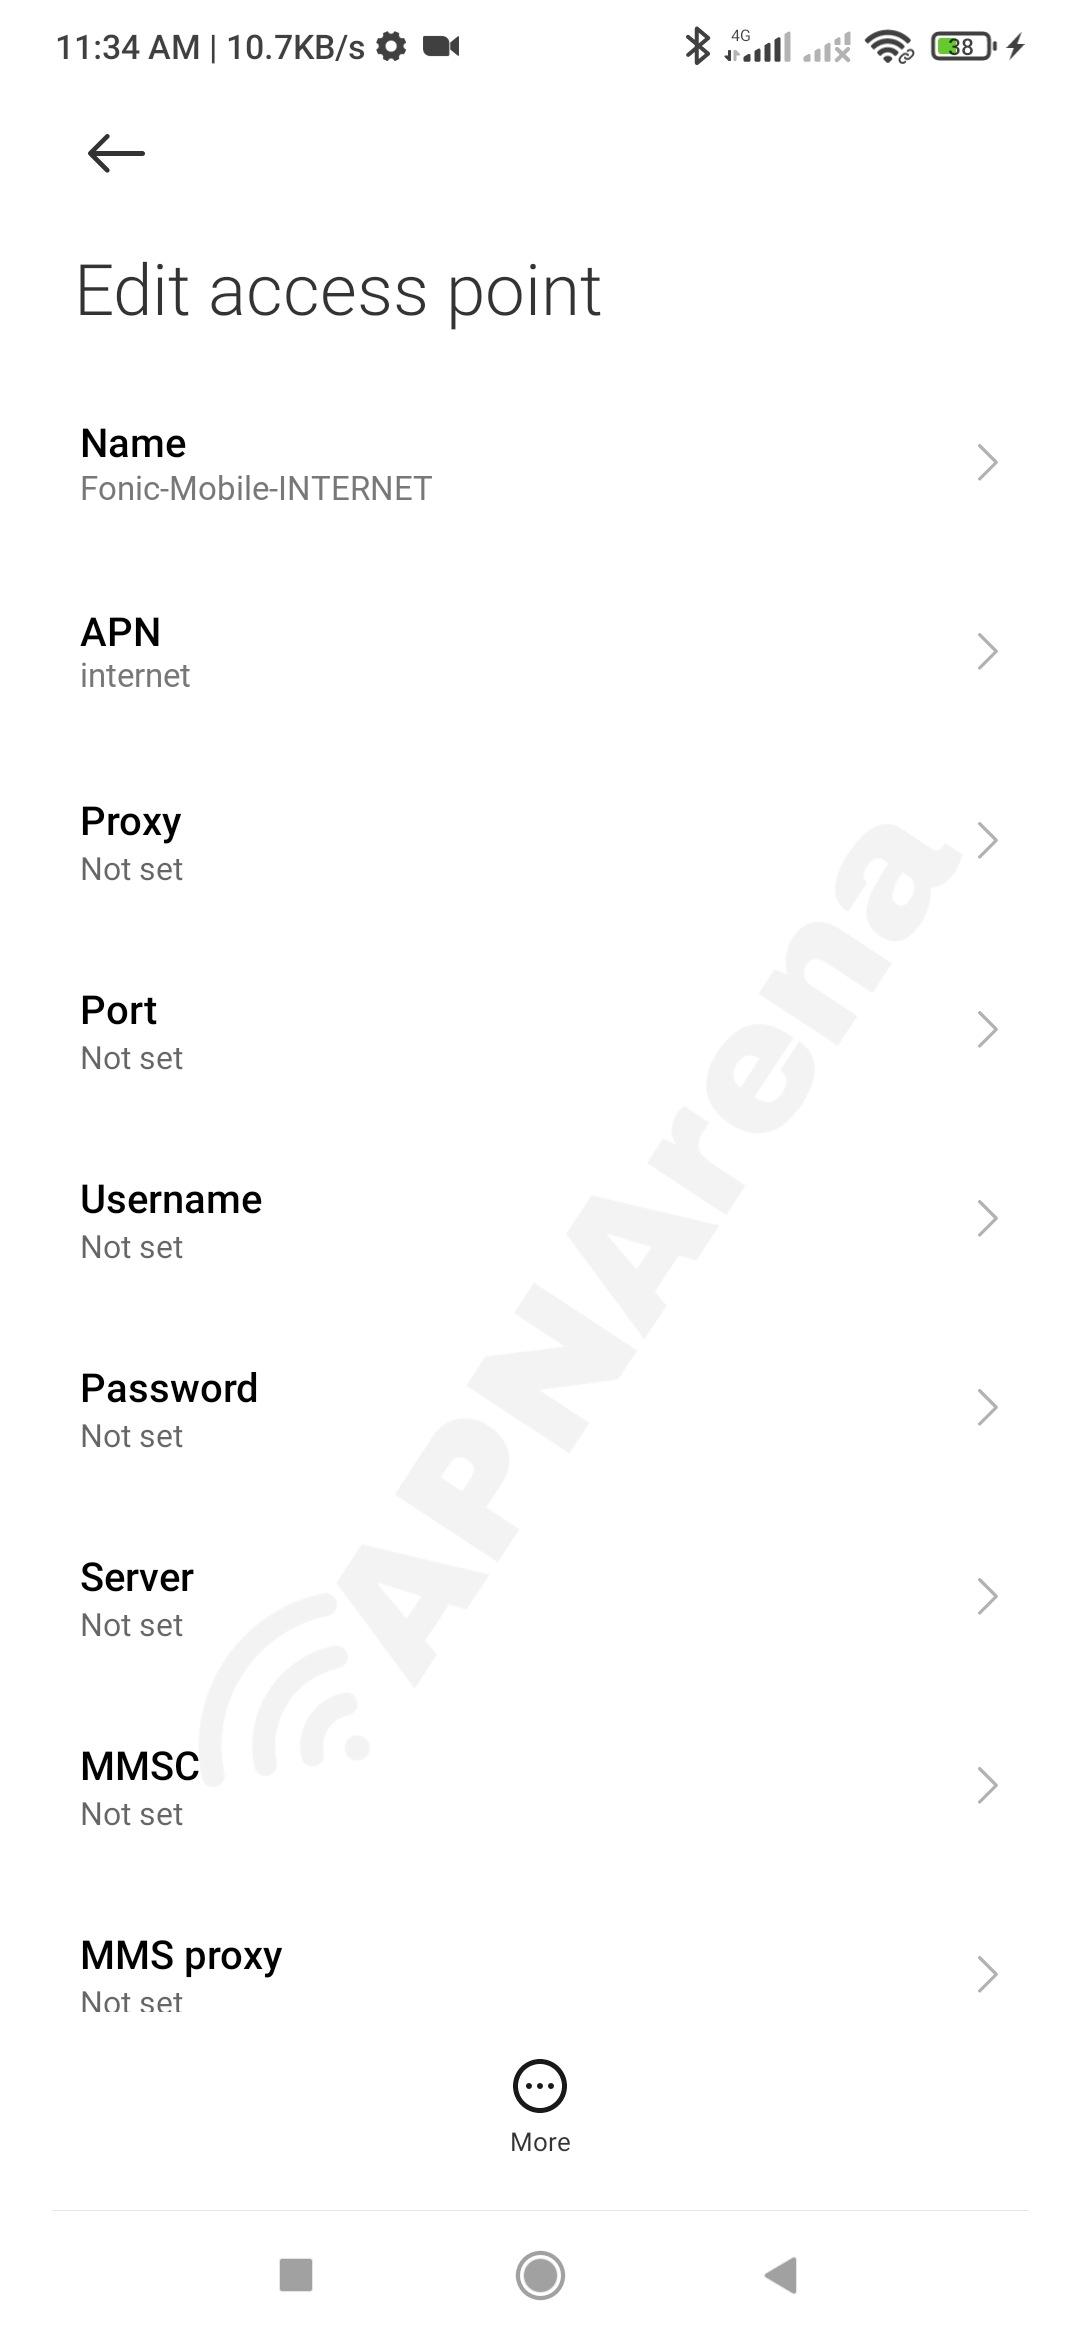 Fonic mobile (ex Lidl) APN Settings for Android